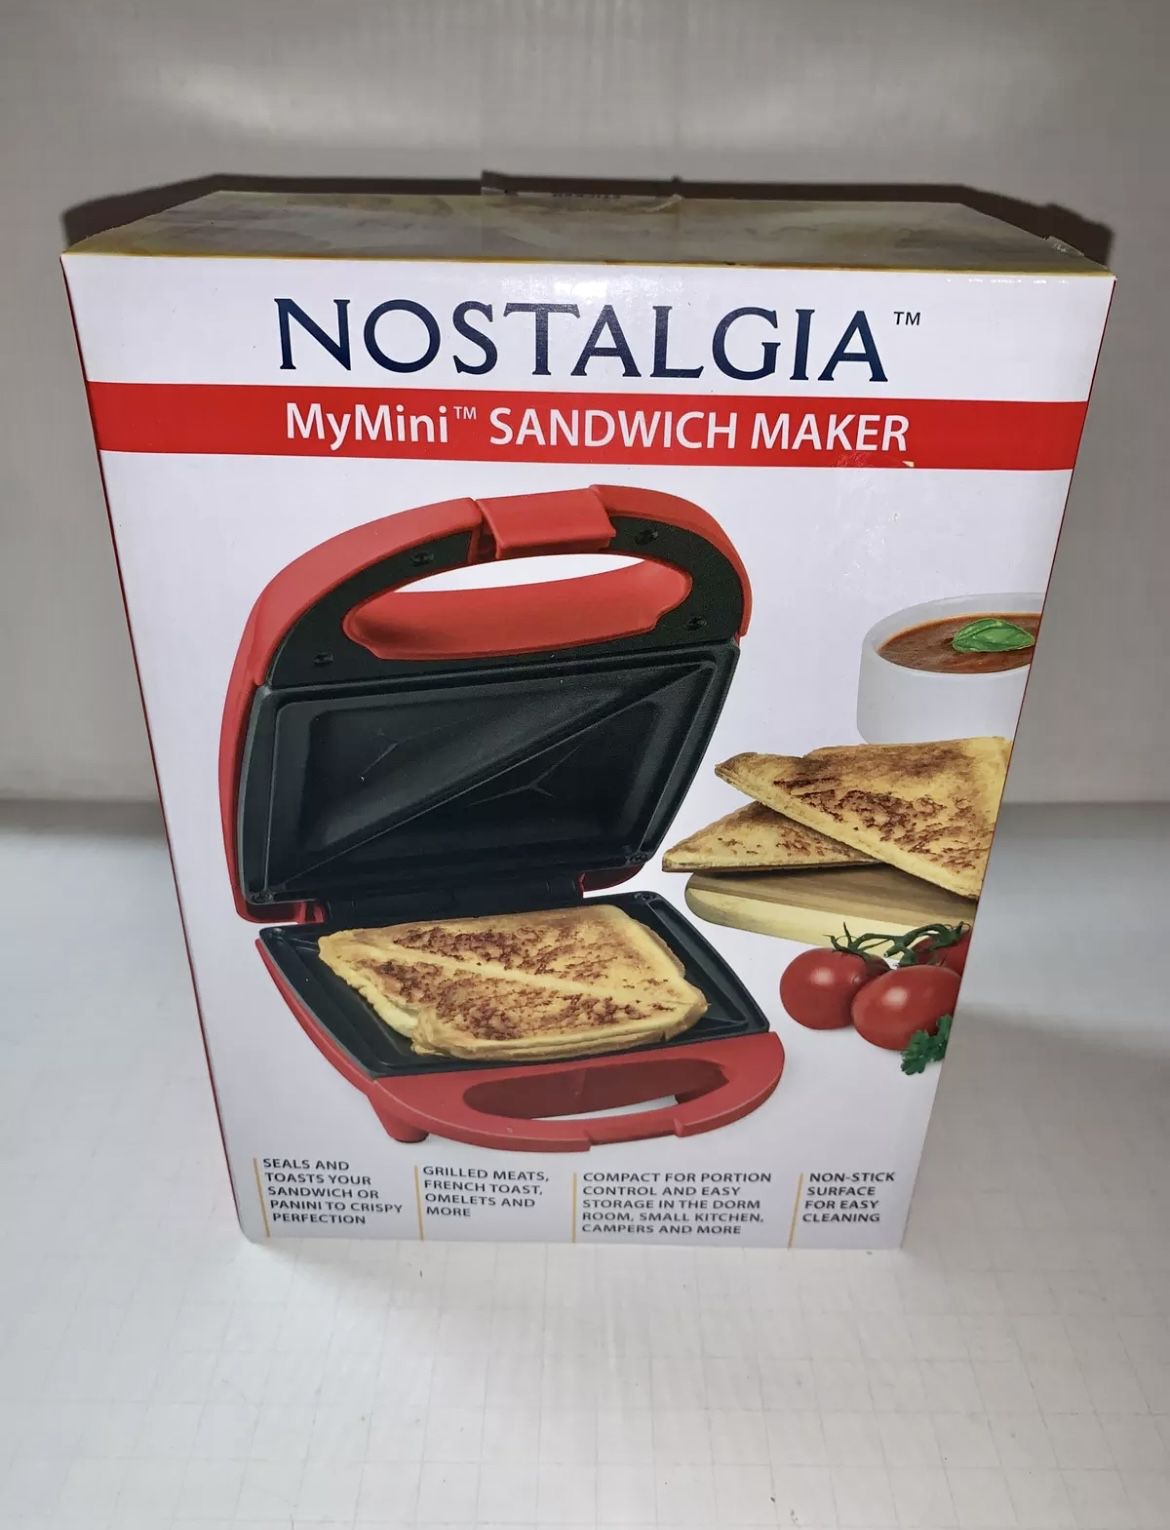 Nostalgia mini sandwich maker toaster compact for portion control seals and  toasts sandwich panini maker (RED)